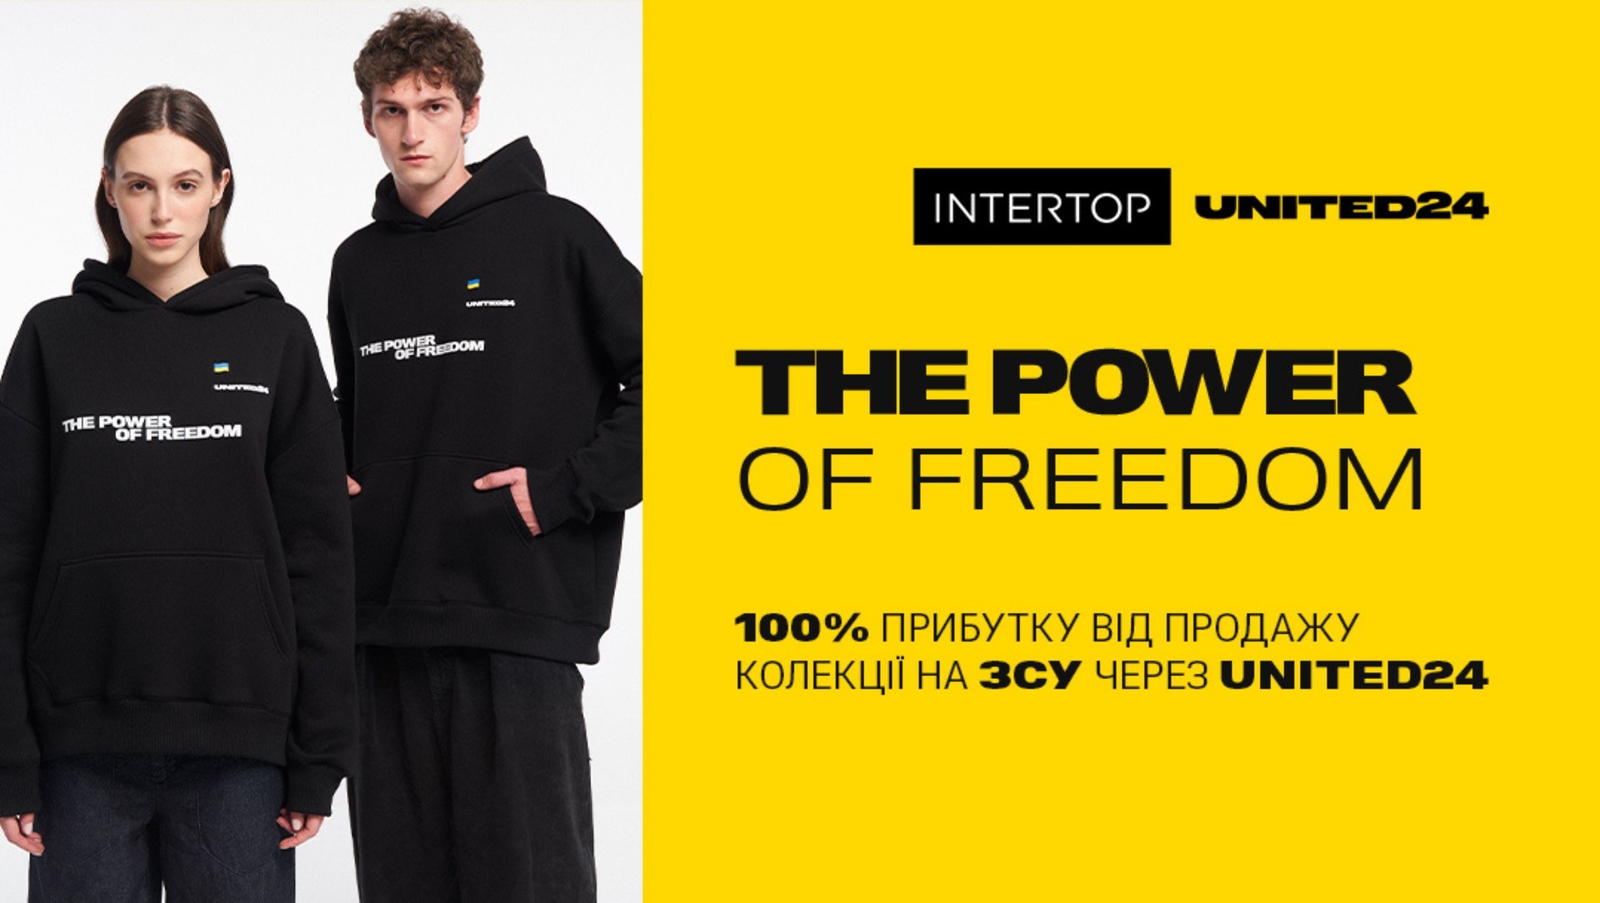 The Power of Freedom: INTERTOP and UNITED24 Release a Charitable Collection